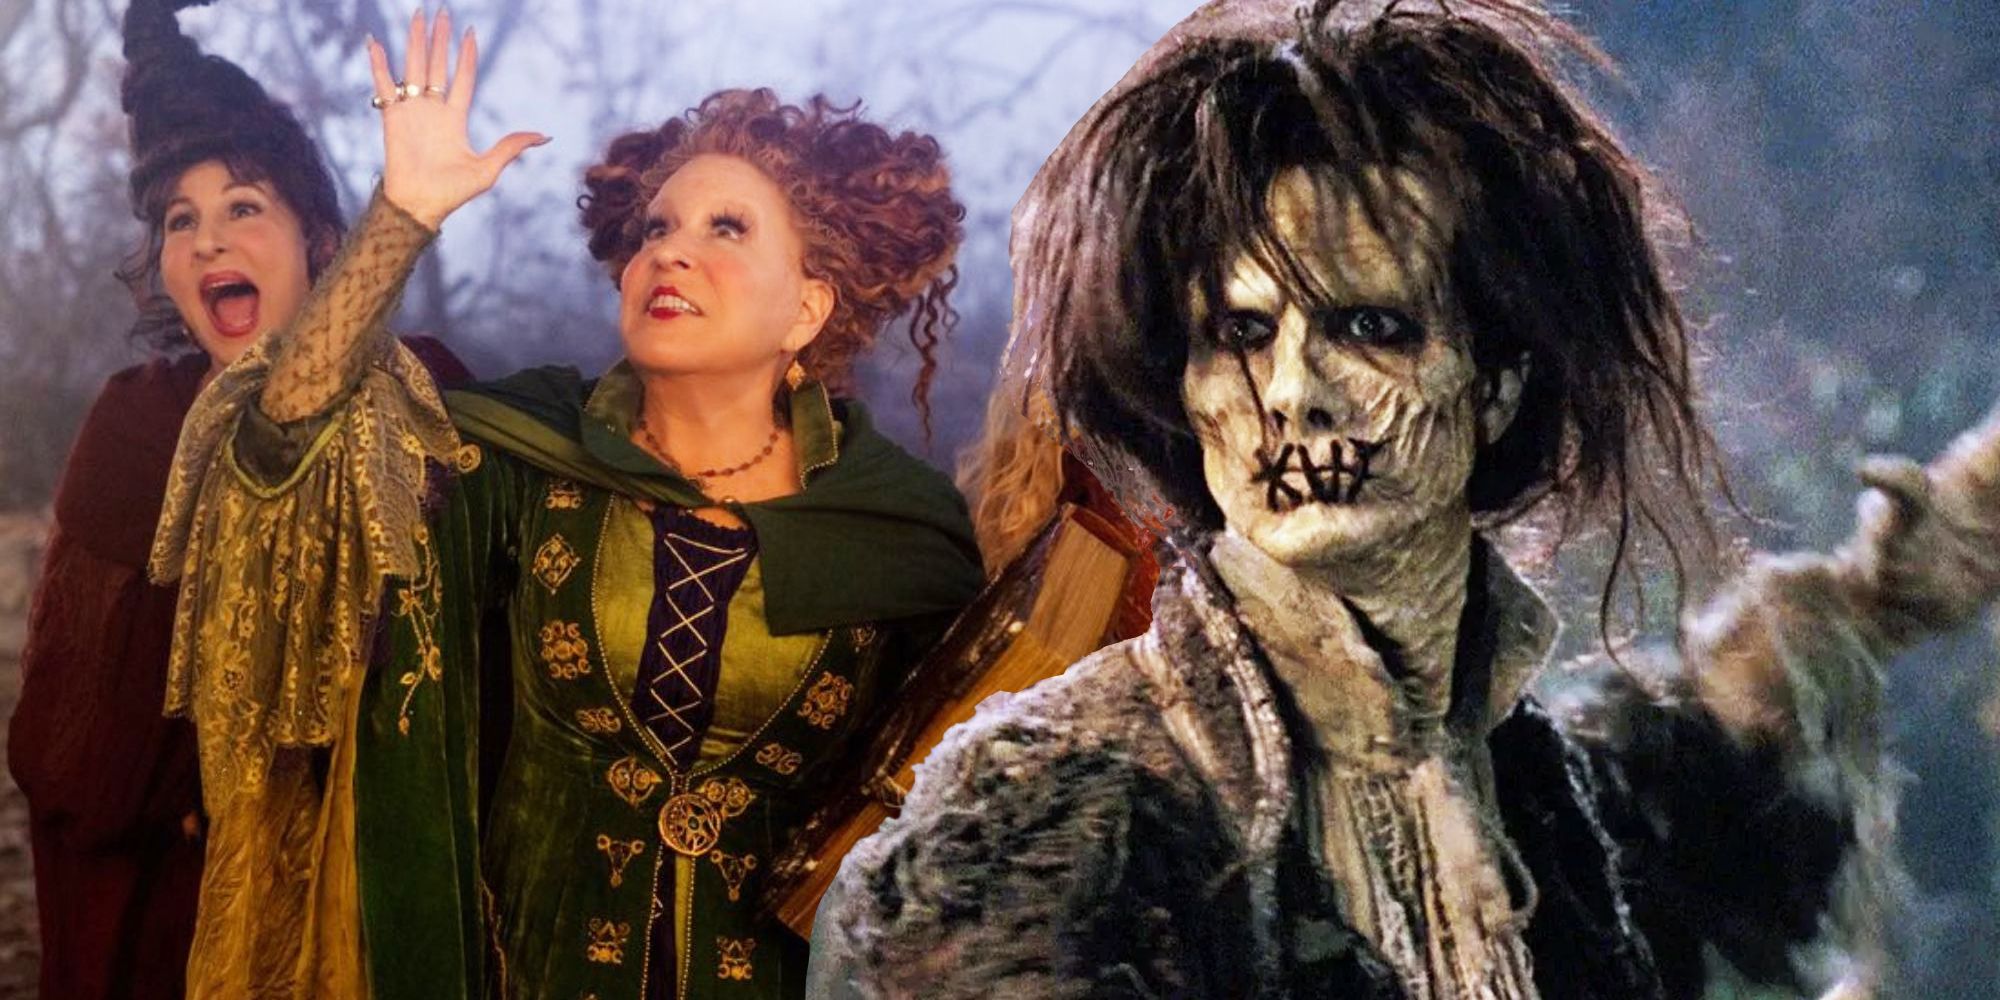 Billy Butcherson and the Sanderson Sisters